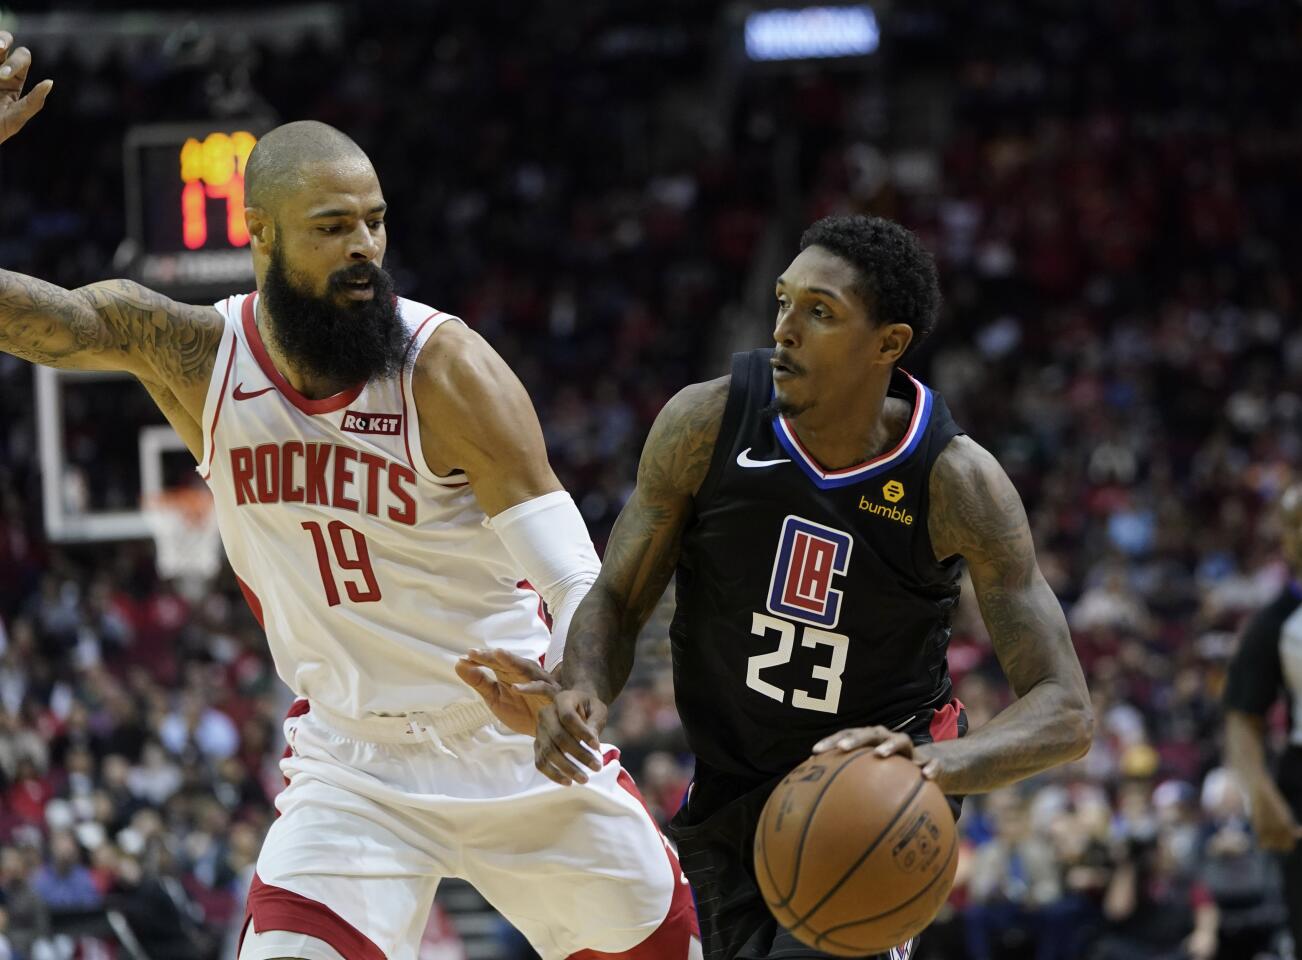 Clippers guard Lou Williams (23) drives toward the basket against Rockets center Tyson Chandler (19) defends during the first half of a game Nov. 13.